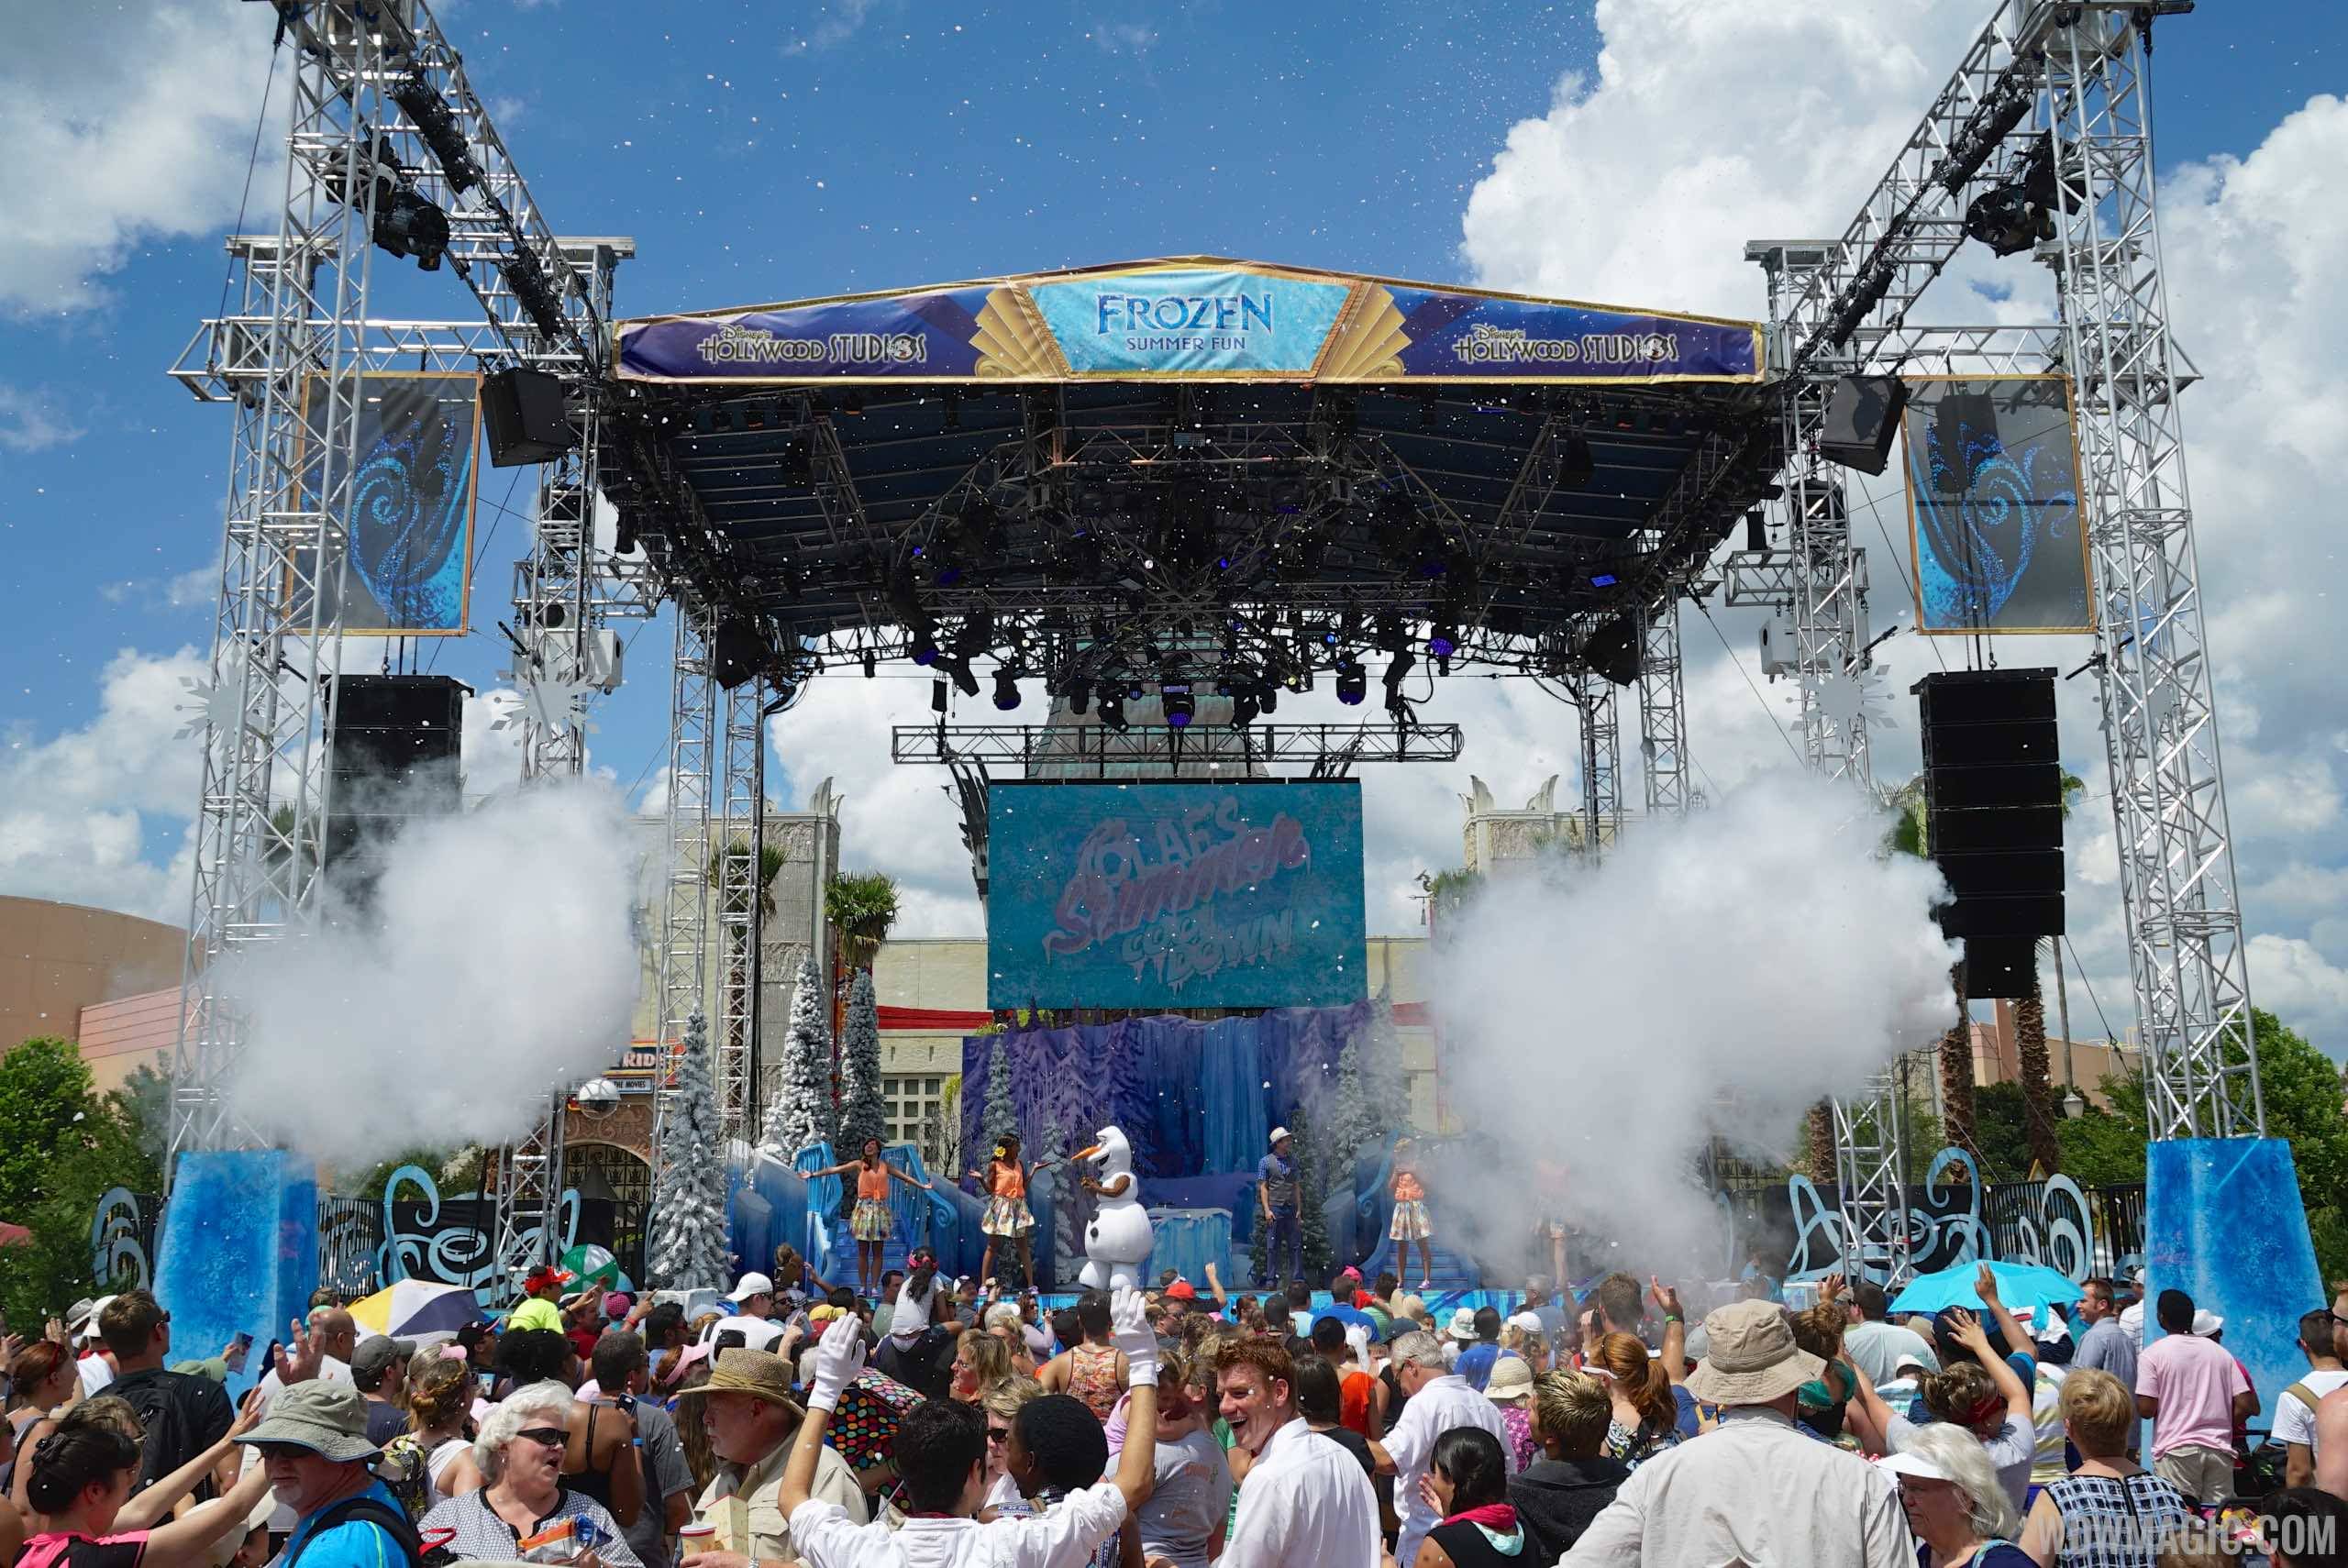 'Frozen Summer Fun' premium package now fully sold out for all remaining dates